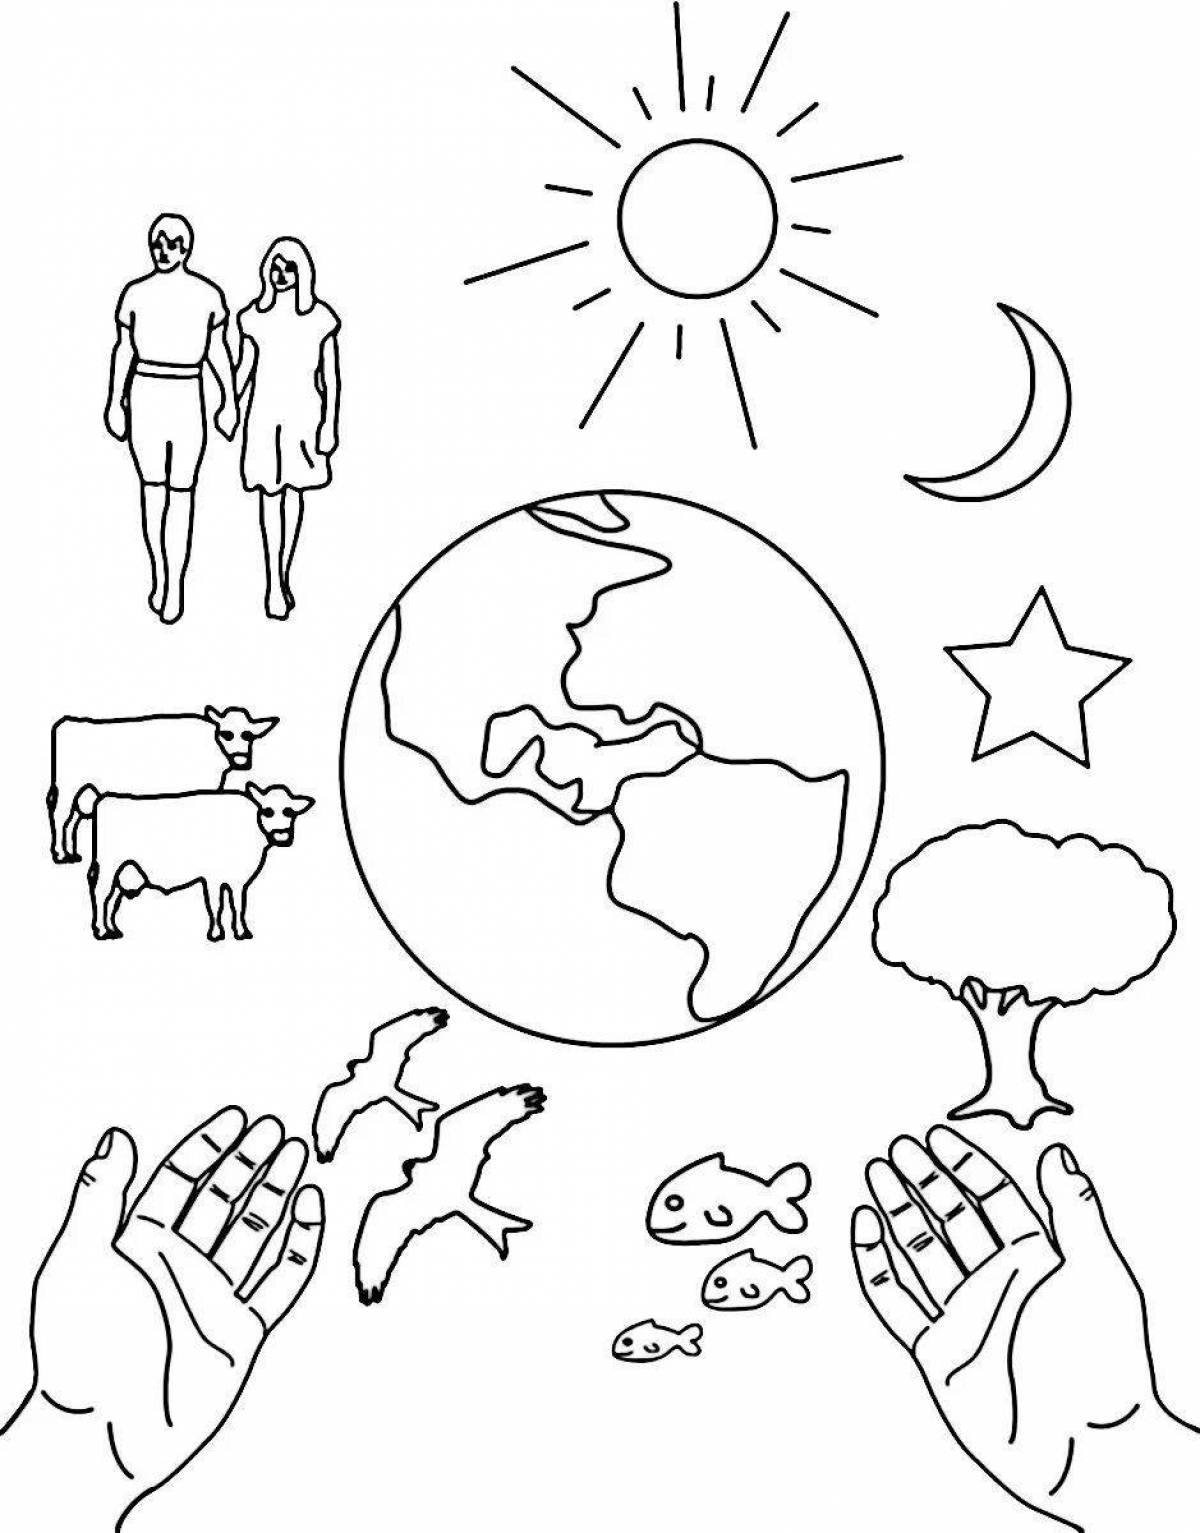 Coloring page charming world on earth